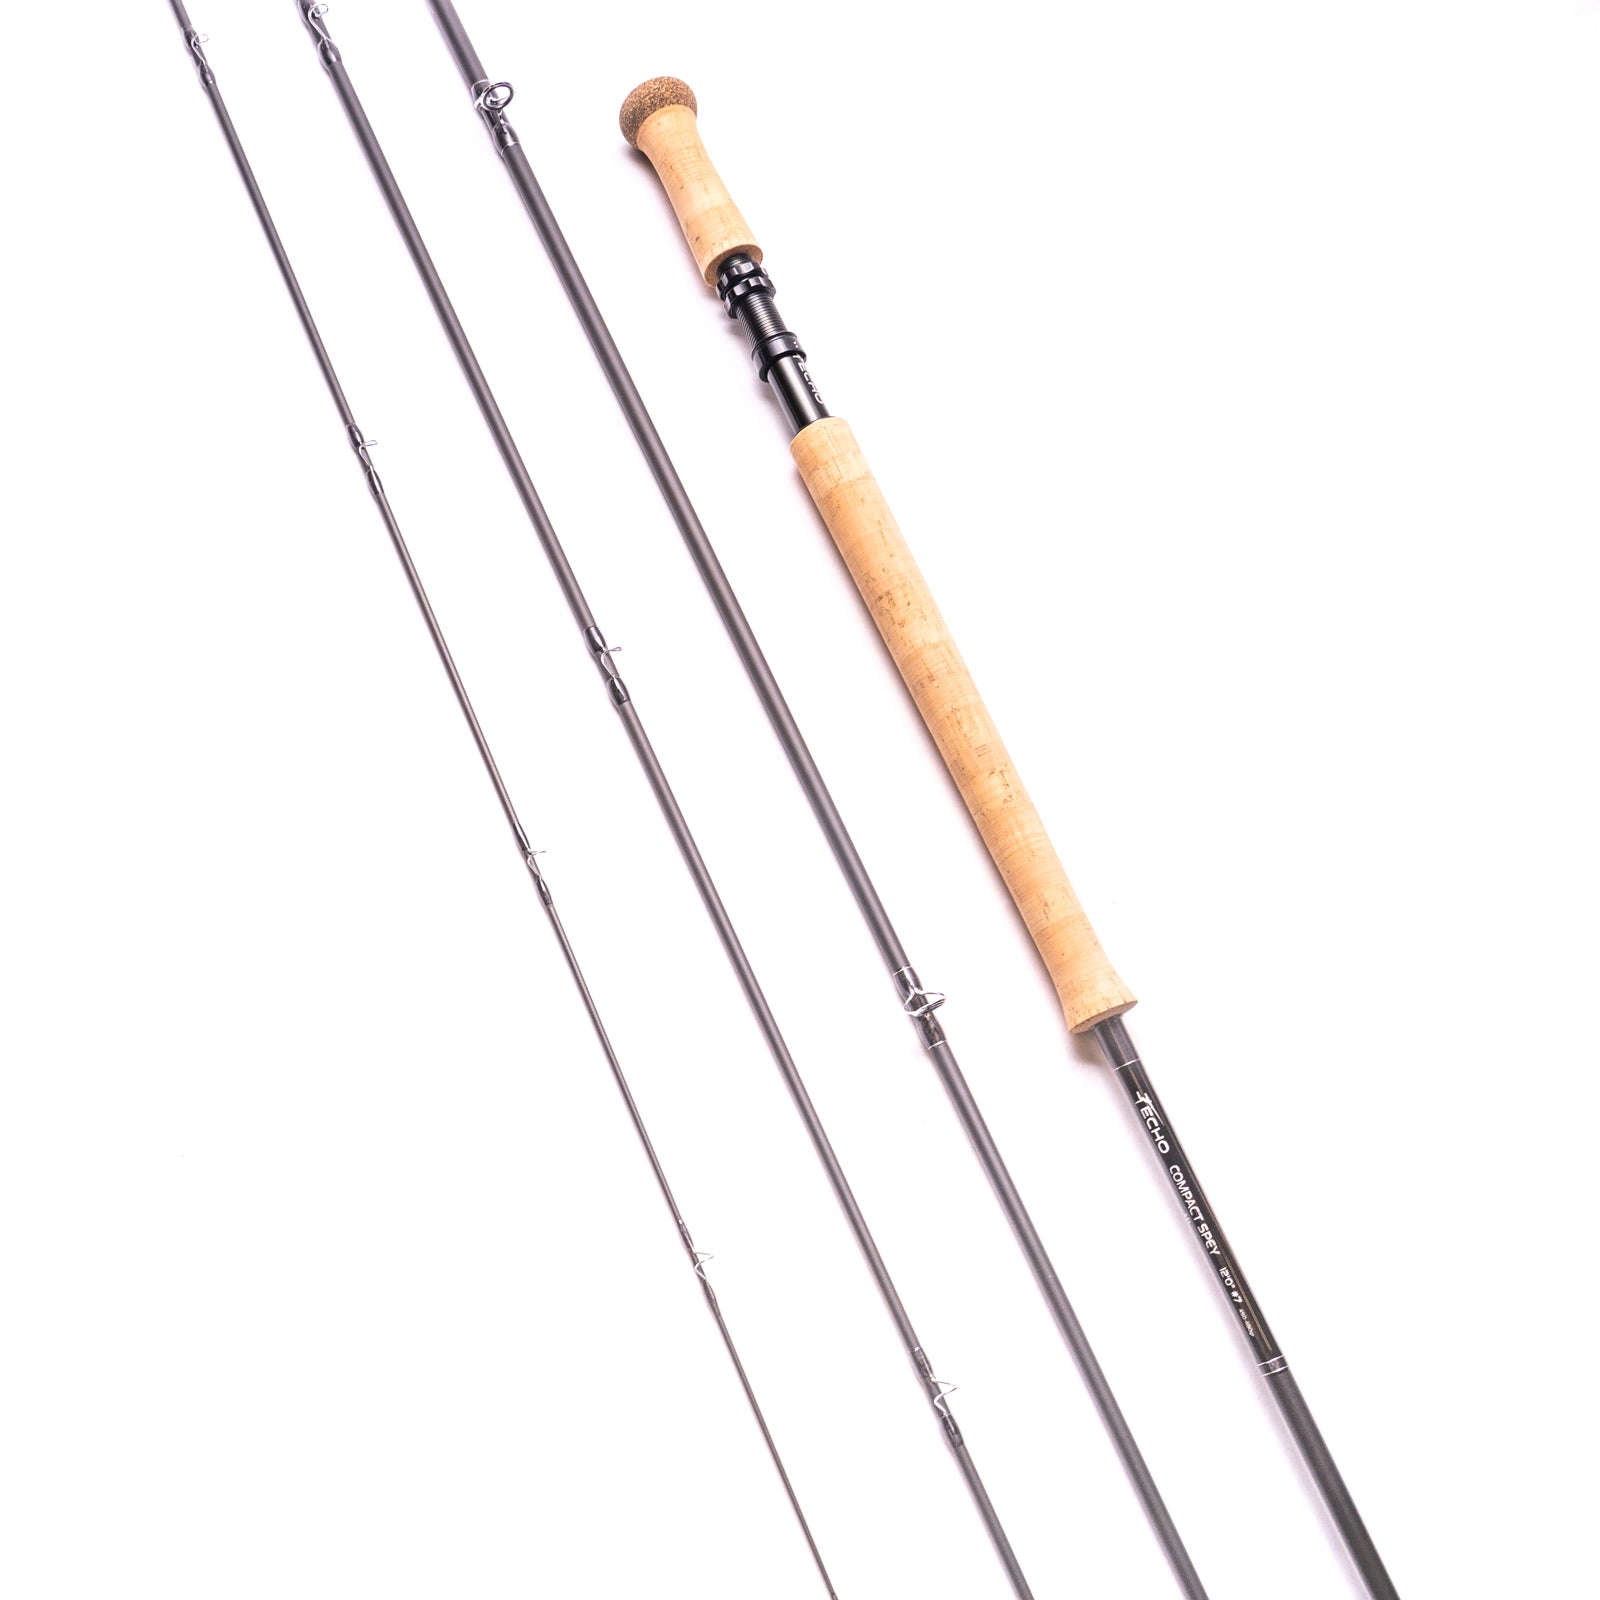 14' Spey Fly Fishing Rod 6 Sections 14FT 9/10 Spey Rod Carbon Fiber Blanks  Two Handed Handle Cork Grip